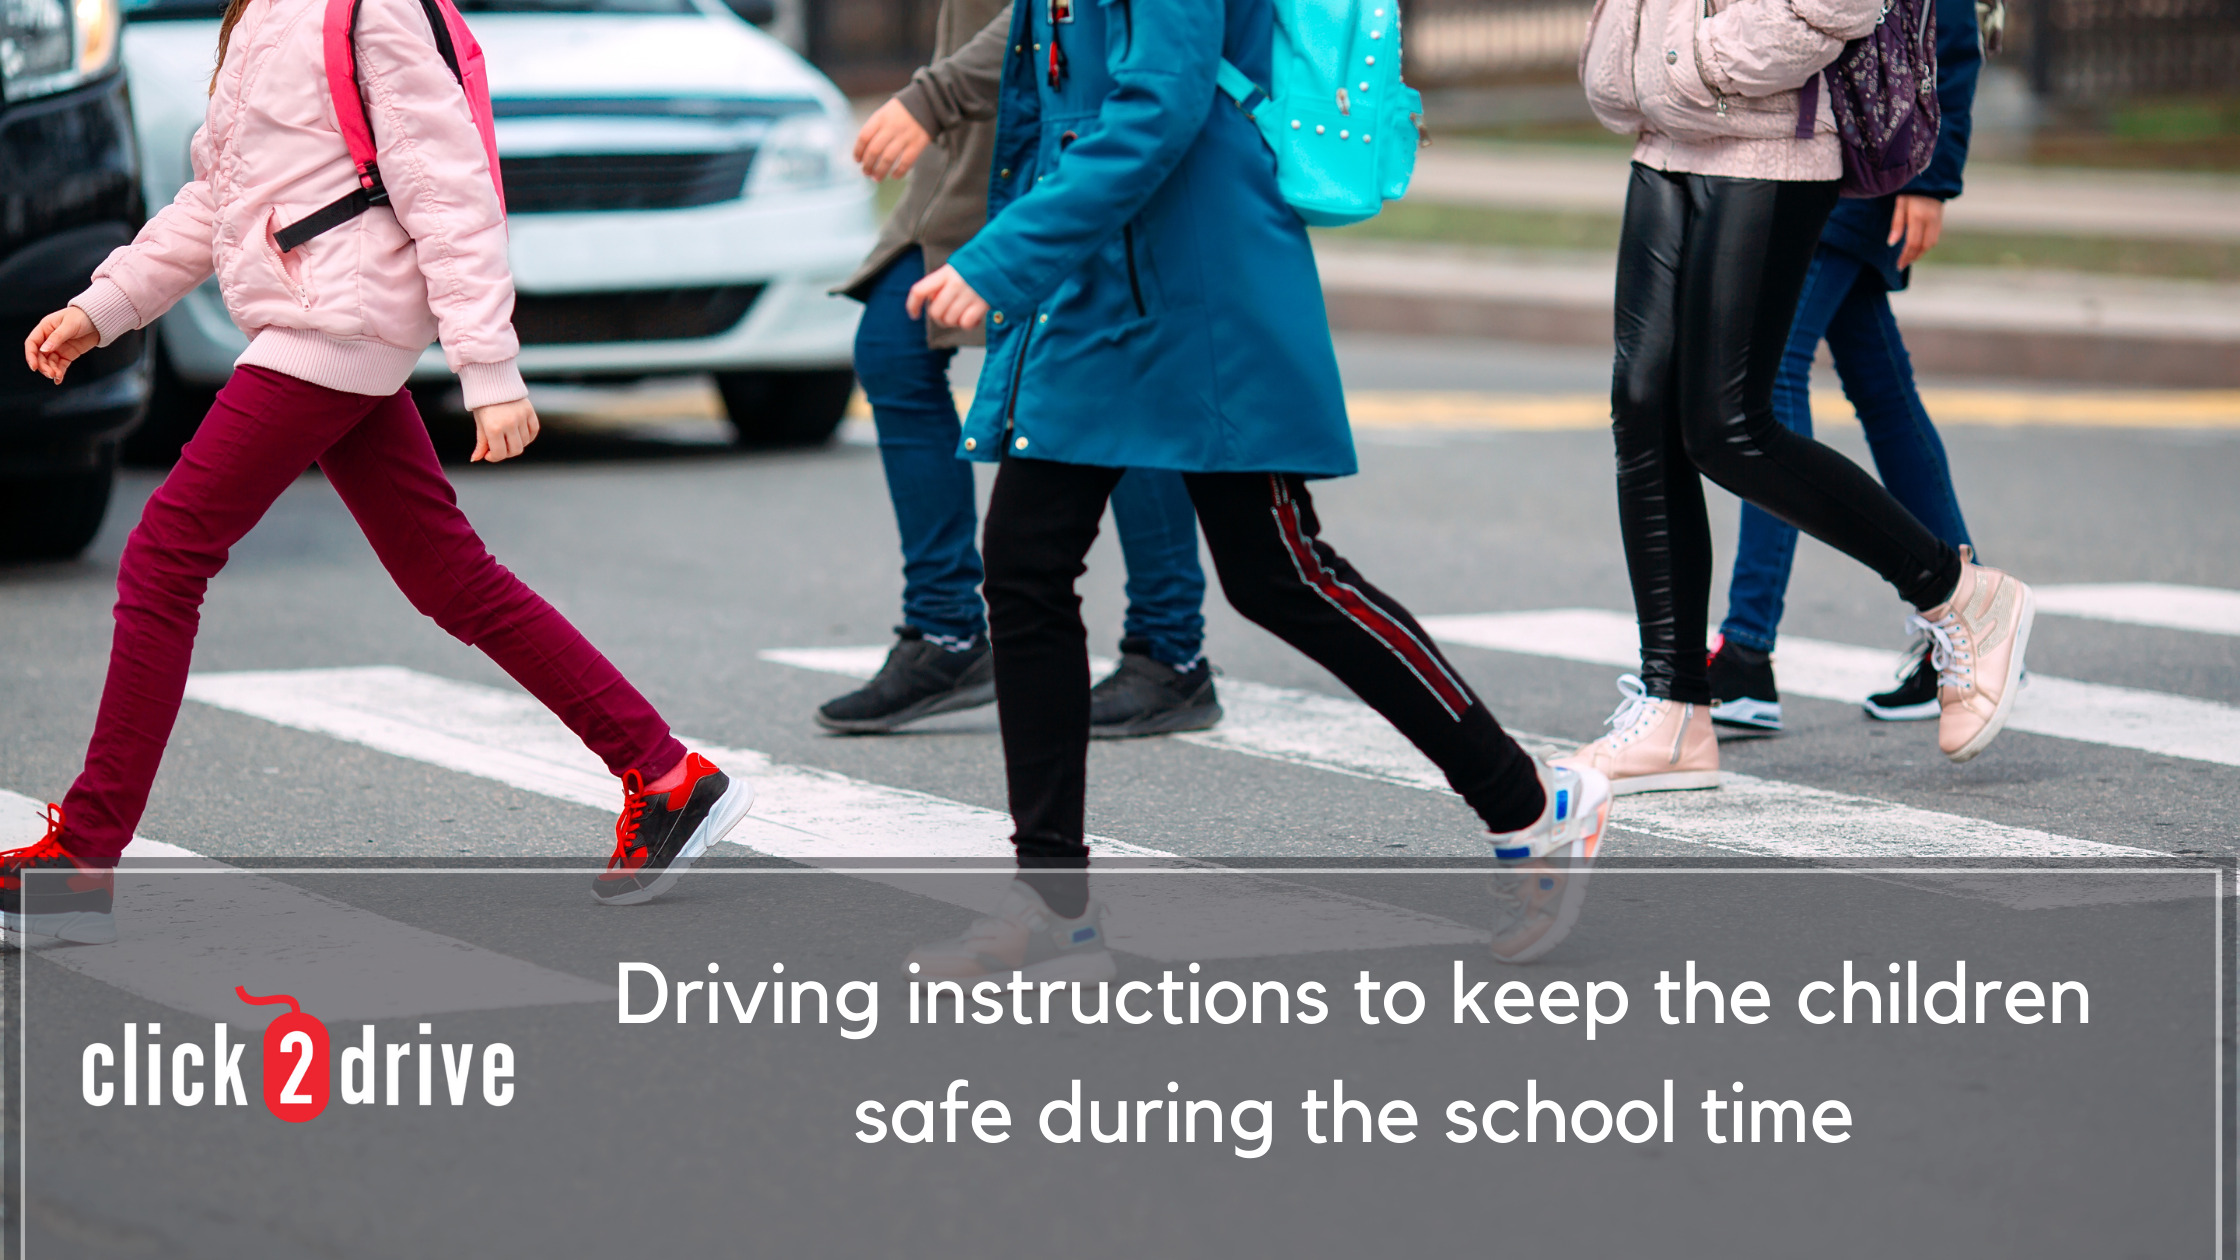 Driving instructions to keep the children safe during the school time